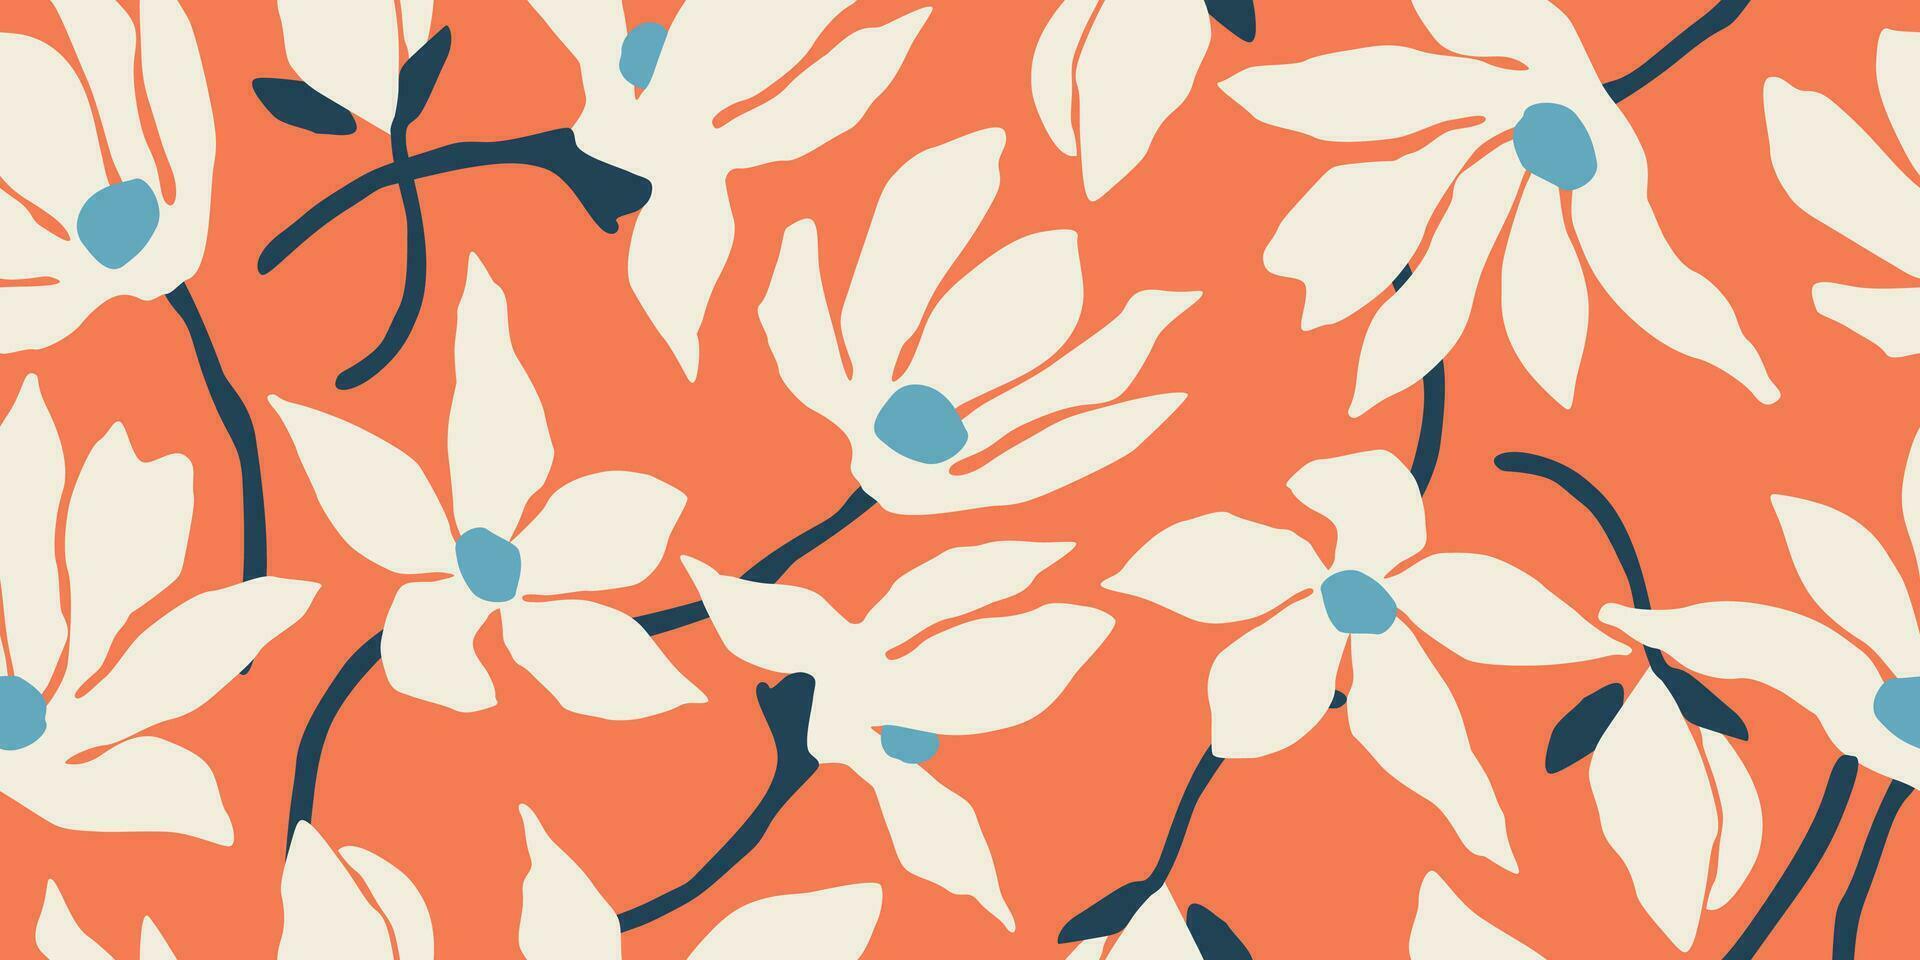 Exotic hand drawn flowers, seamless patterns with floral for fabric, textiles, clothing, wrapping paper, cover, banner, interior decor, abstract backgrounds. vector illustration.